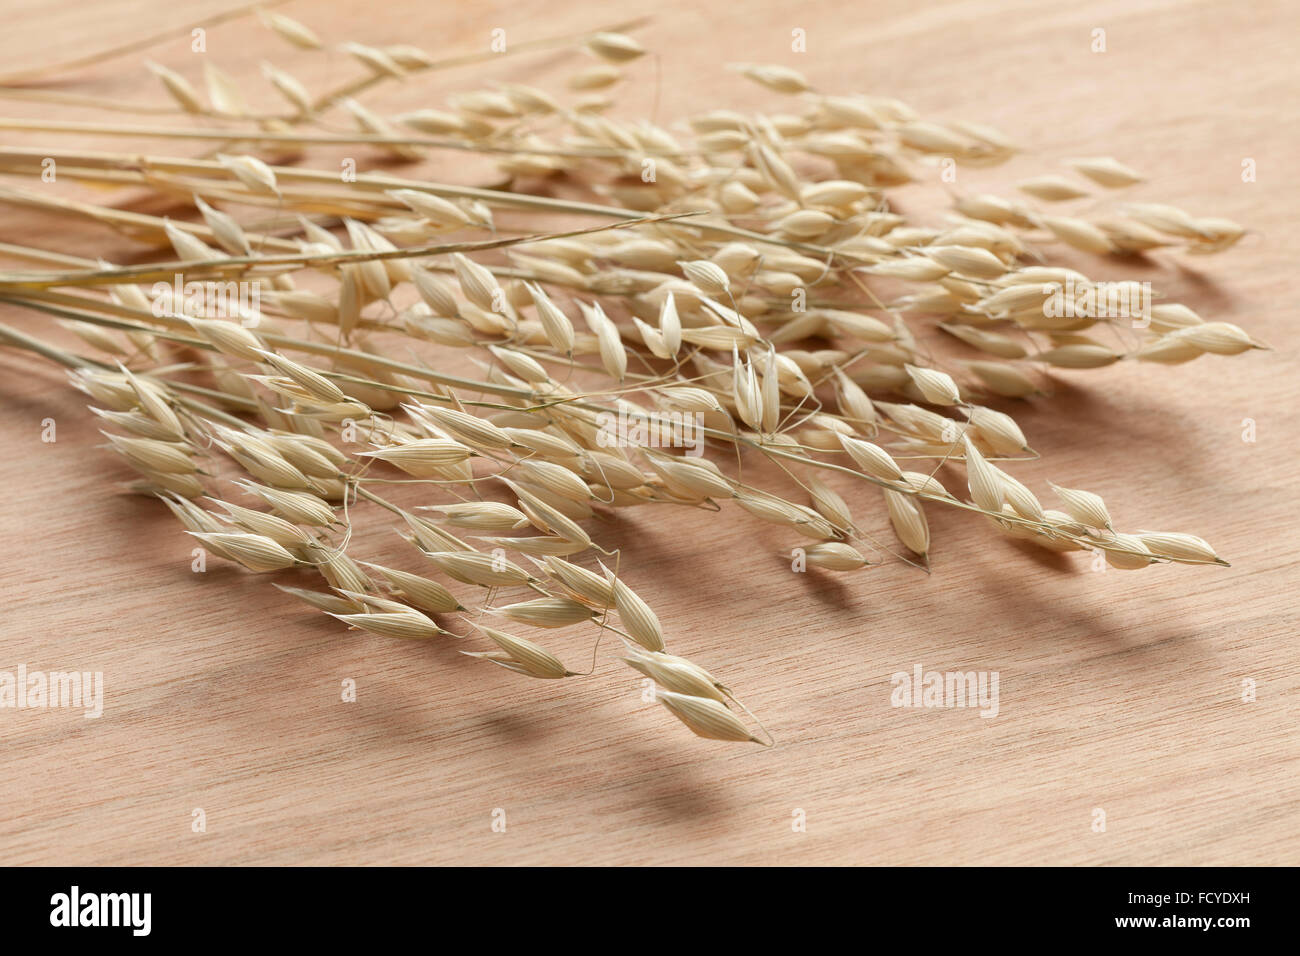 Dried oat seeds Stock Photo